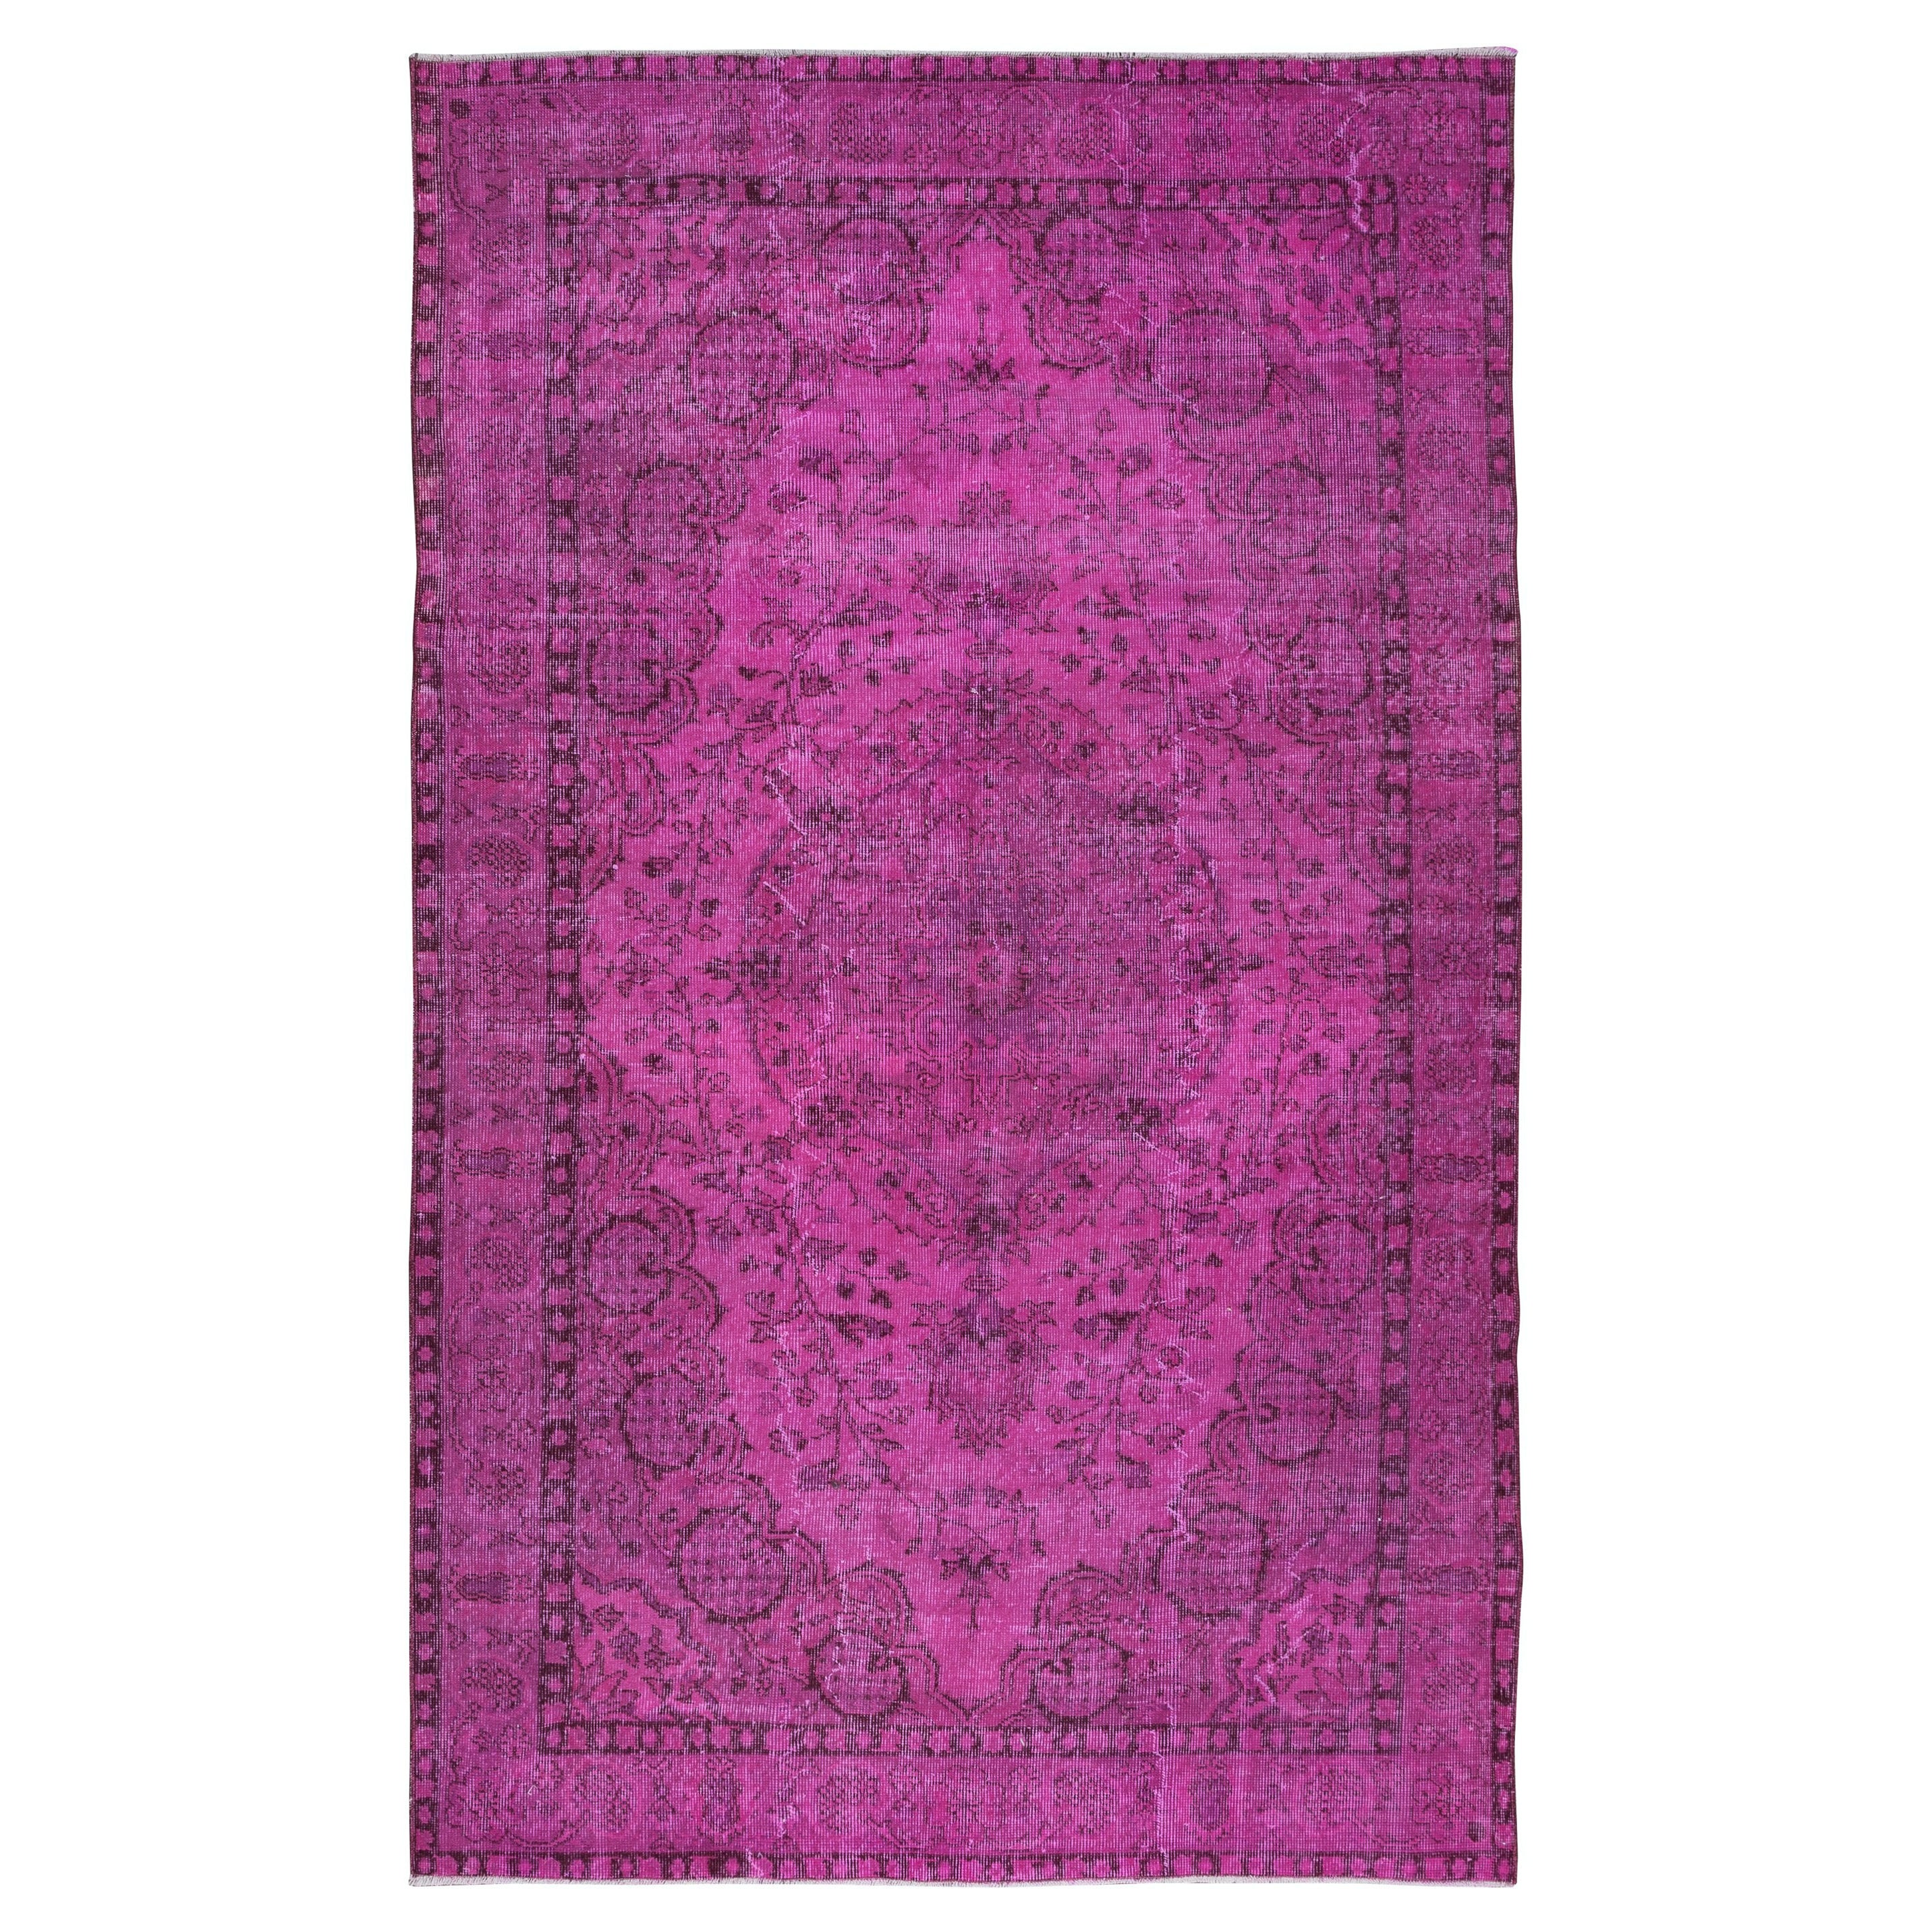 5.6x9 Ft Pink Handmade Turkish Wool Area Rug, Contemporary Low Pile Carpet For Sale